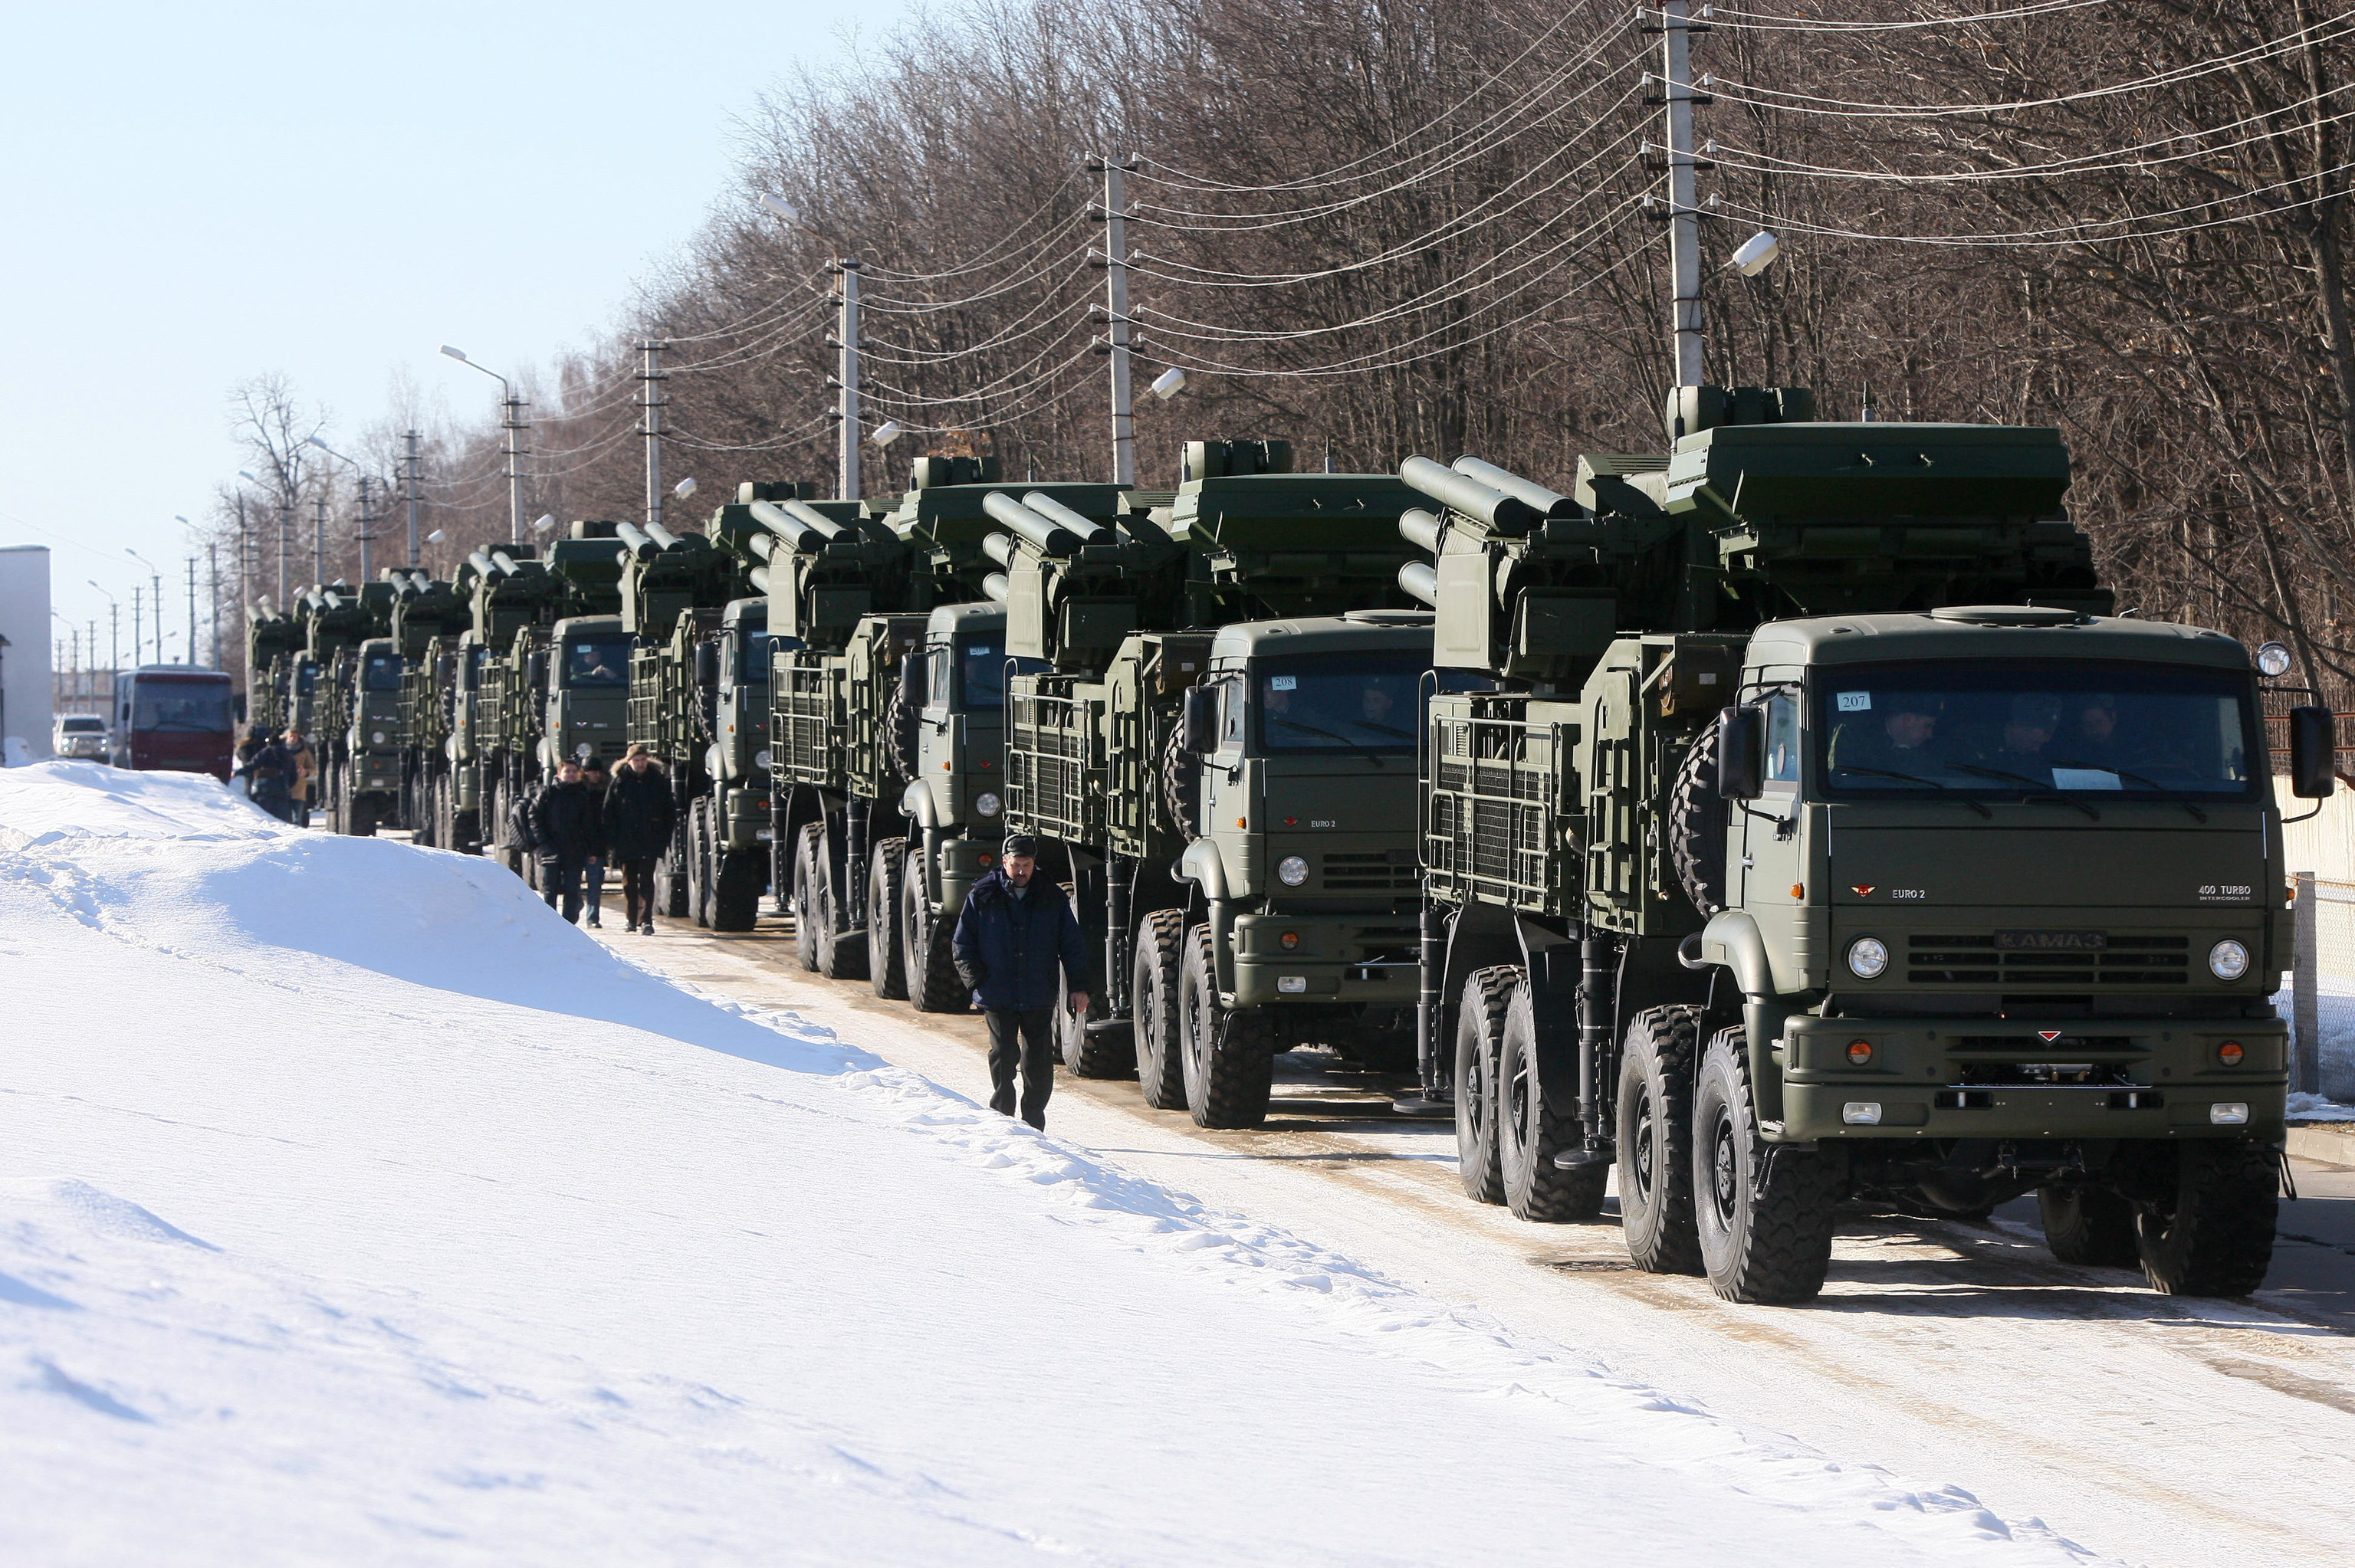 Pantsir-S1 combined short to medium range surface-to-air missile weapon system. File photo